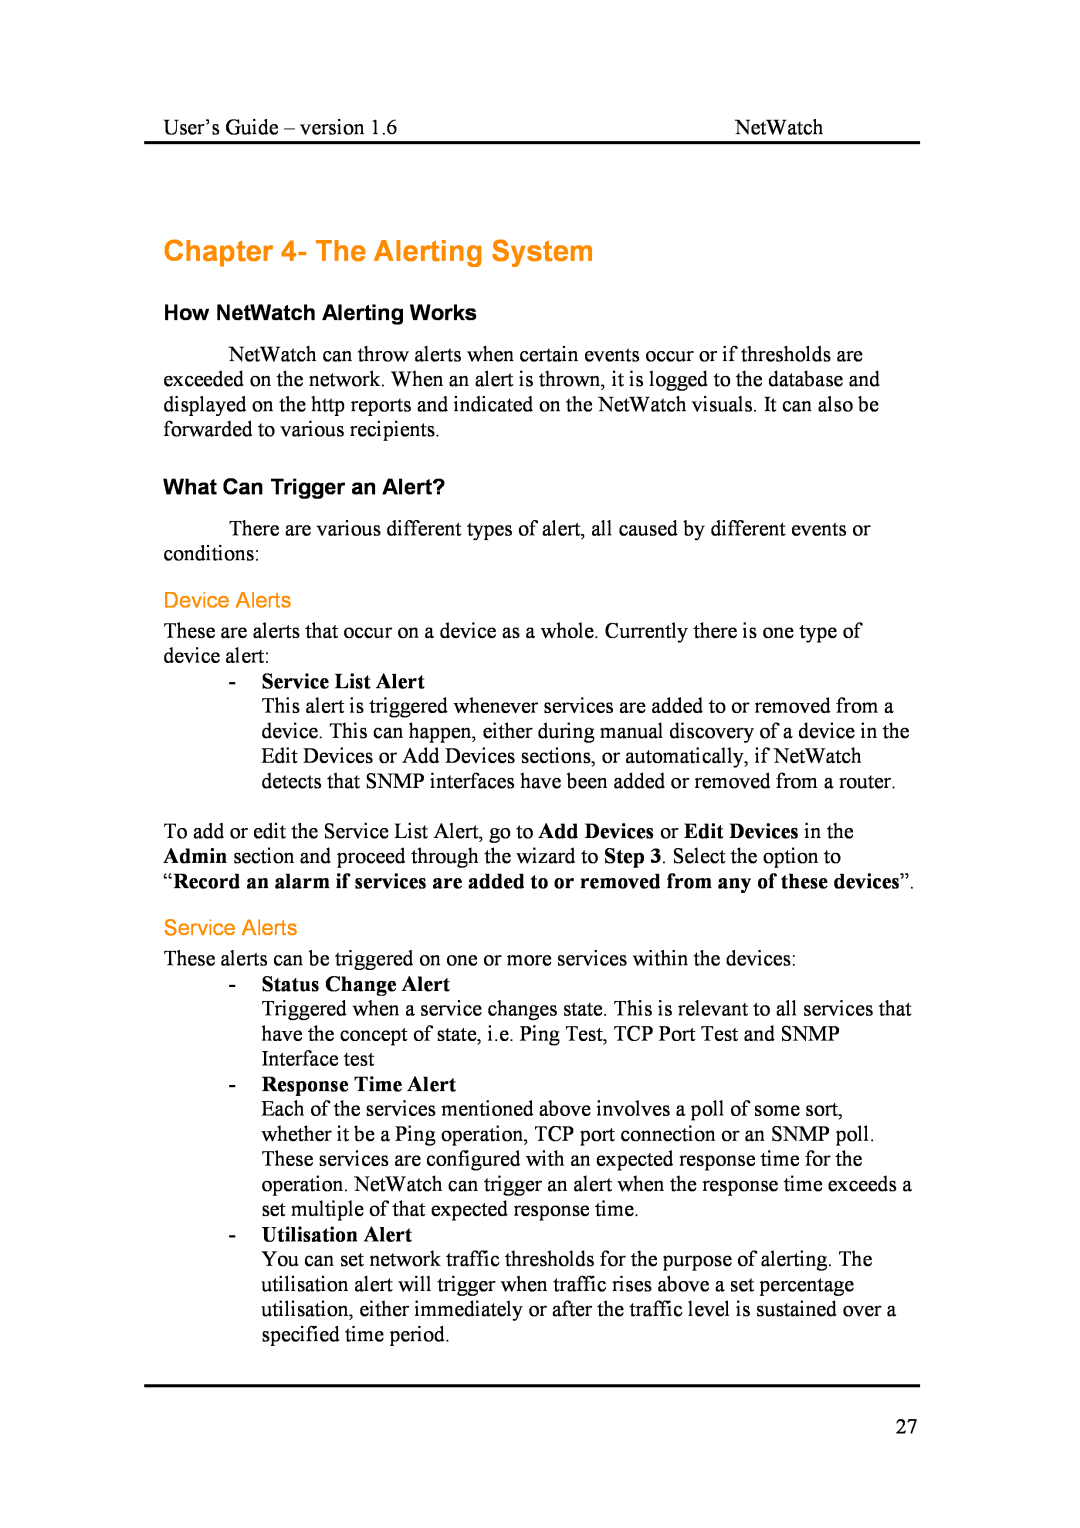 Fluke Network Router manual The Alerting System, How NetWatch Alerting Works, What Can Trigger an Alert?, Device Alerts 